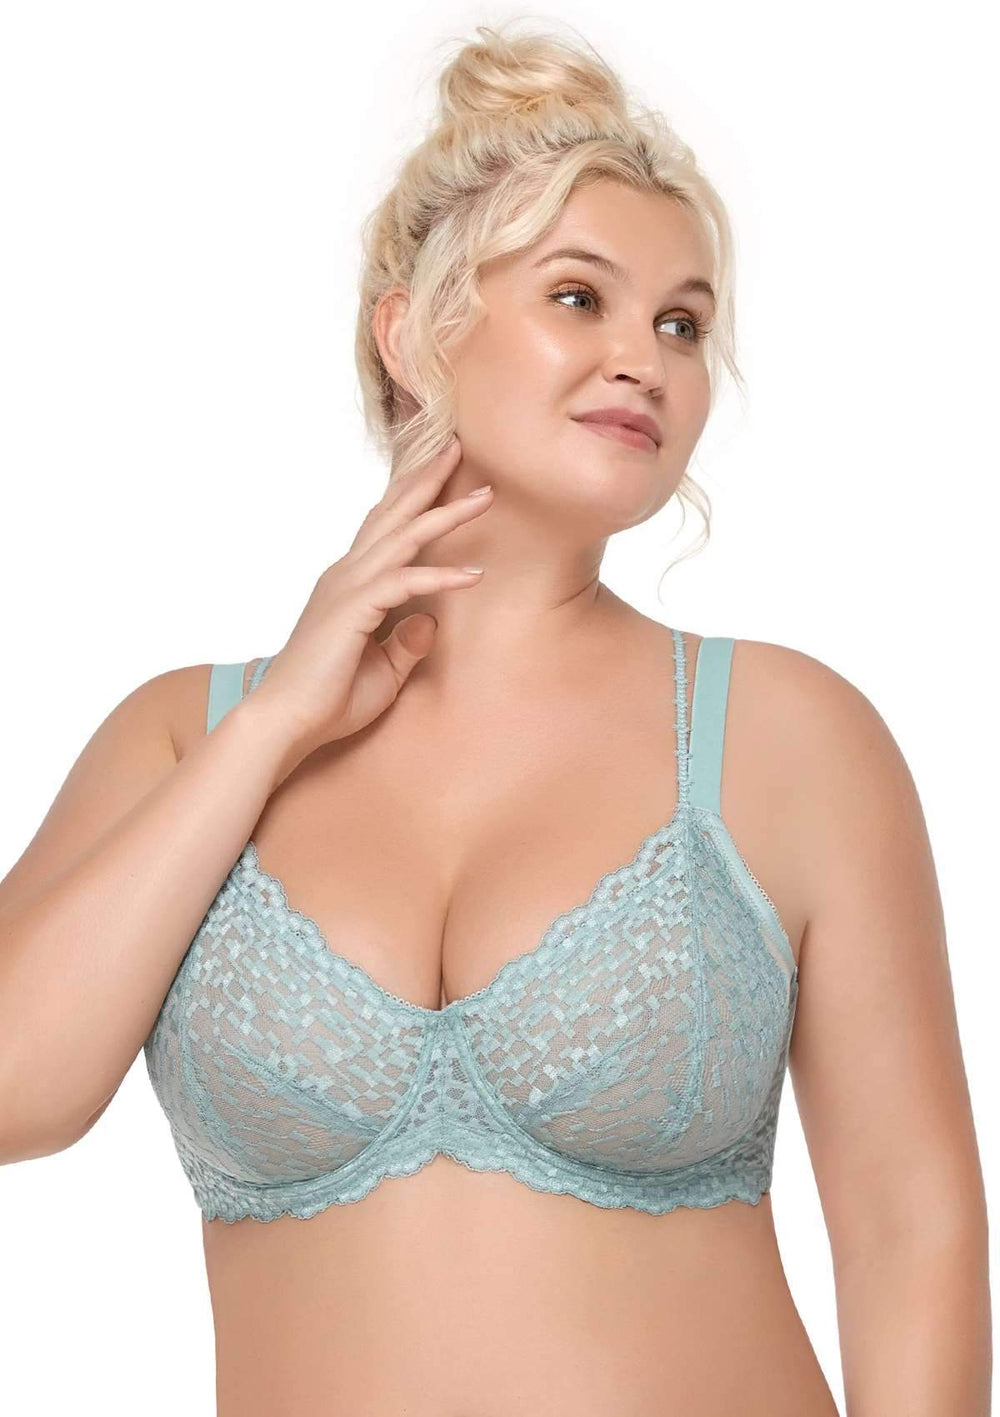 Breathable Double Strap Jacquard Lace Bras For Older Women For Middle Aged  And Elderly Women Plus Size From Waxeer, $5.7